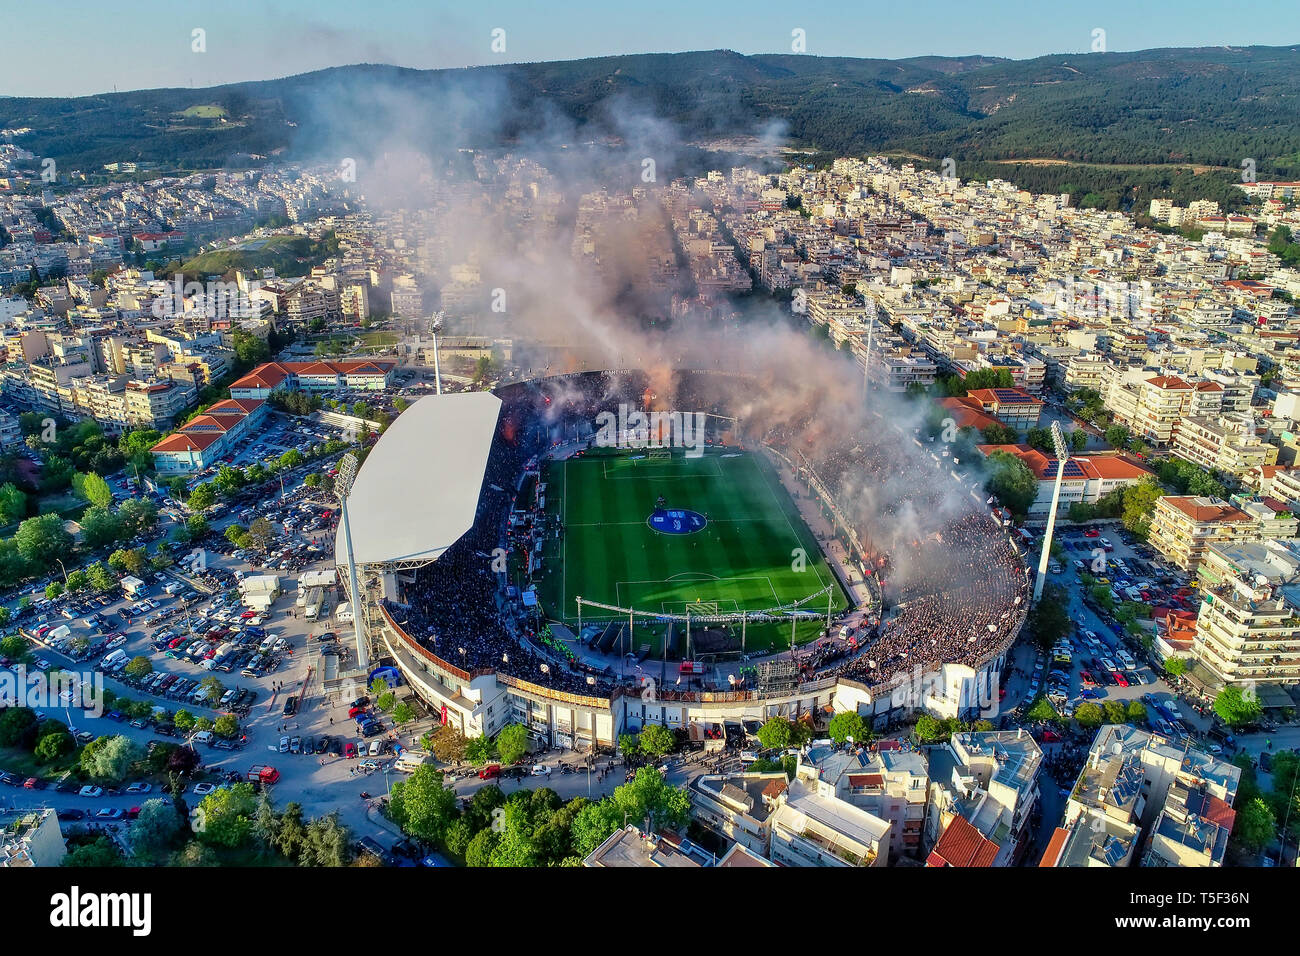 Thessaloniki, Greece, April 21, 2019: Aerial shoot of the Toumba Stadium full of fans of PAOK celebrating the winning of the Greek Super League champi Stock Photo